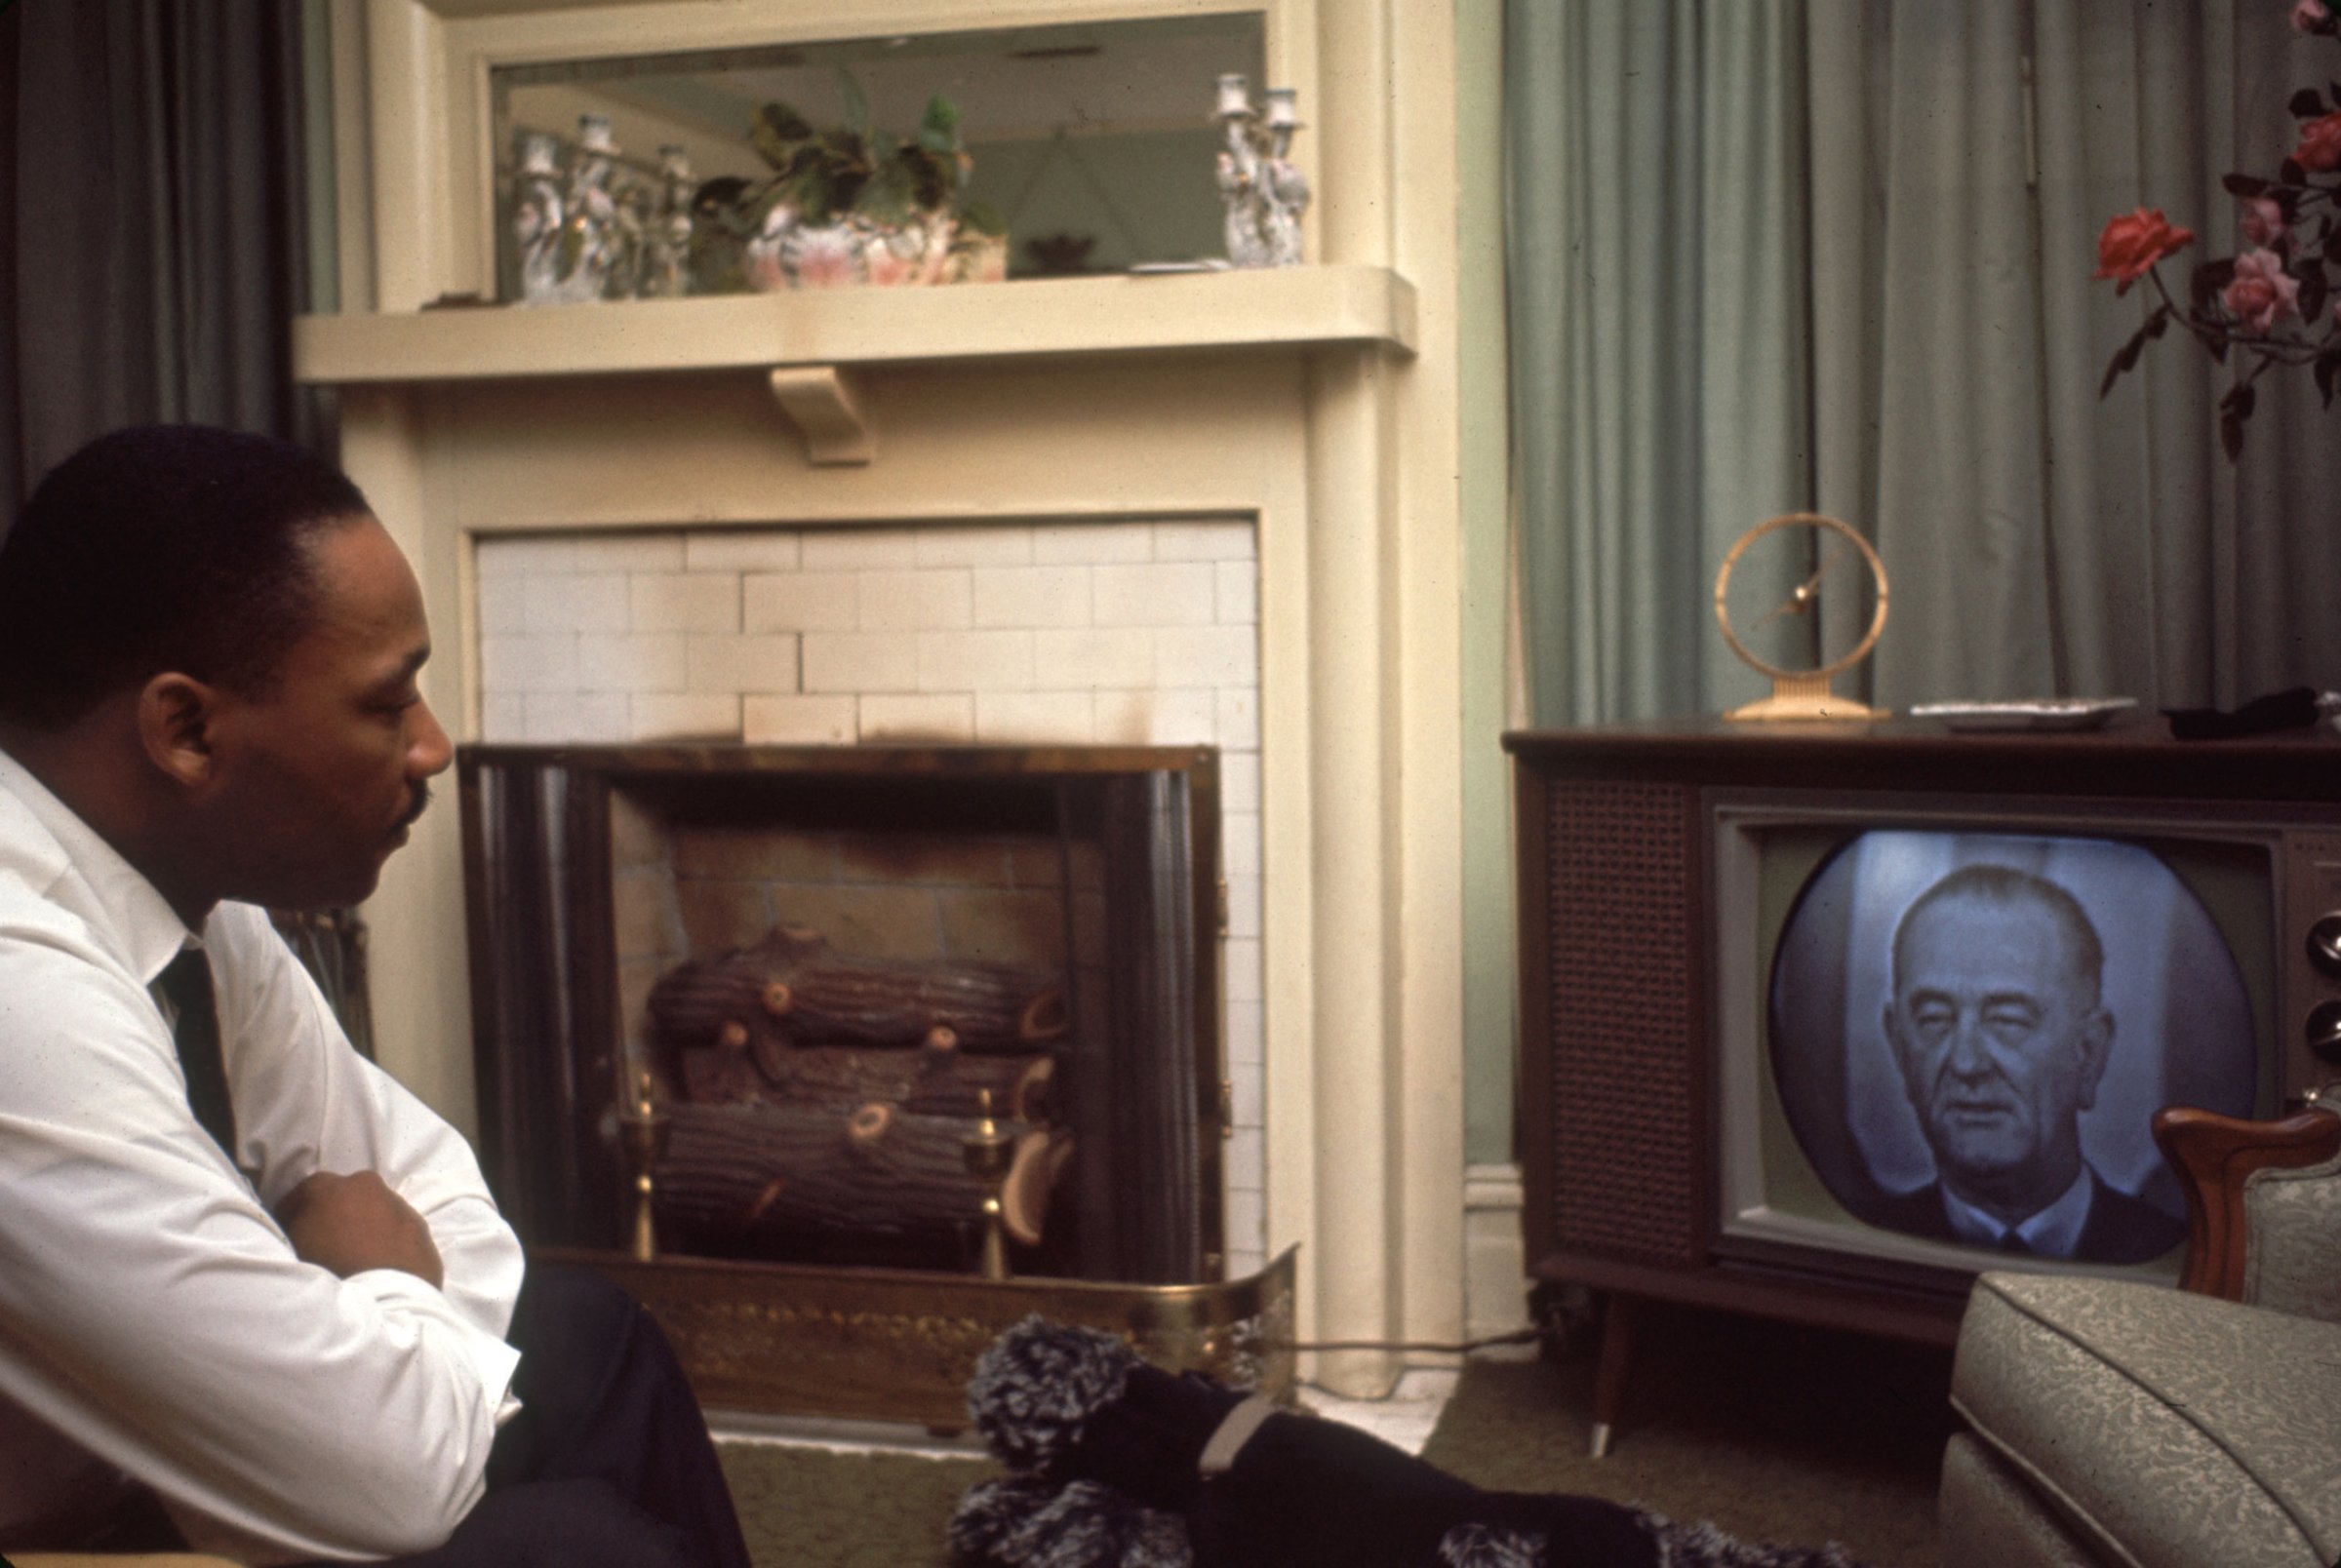 American religious and Civil Rights leader Martin Luther King Jr. watches US President Lyndon Johnson on television, Selma, Alabama, March 1965.